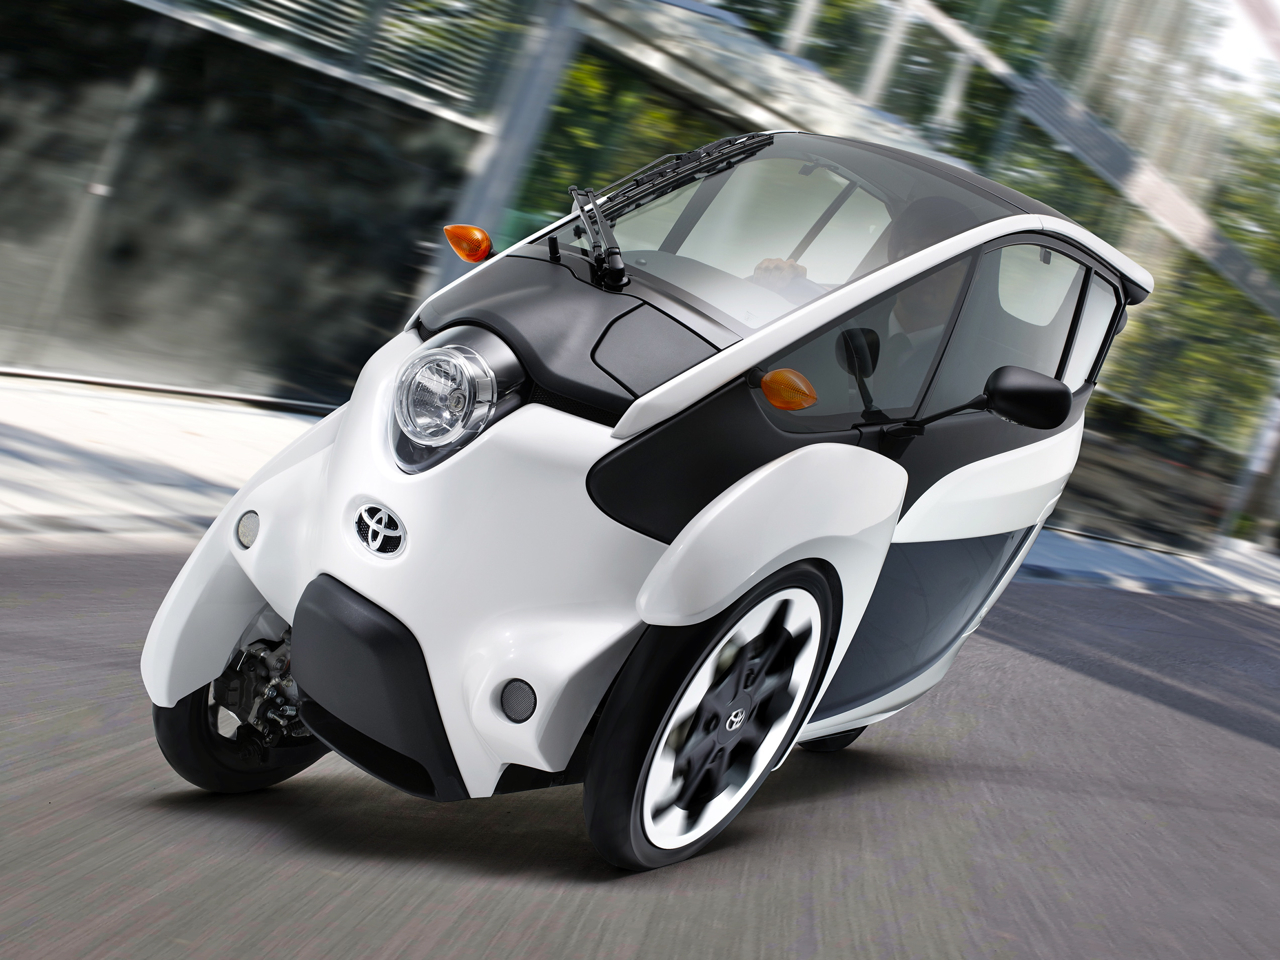 Toyota i-Road Test Drive: Is This Three-Wheeled Electric Vehicle The Answer To Urban Gridlock?